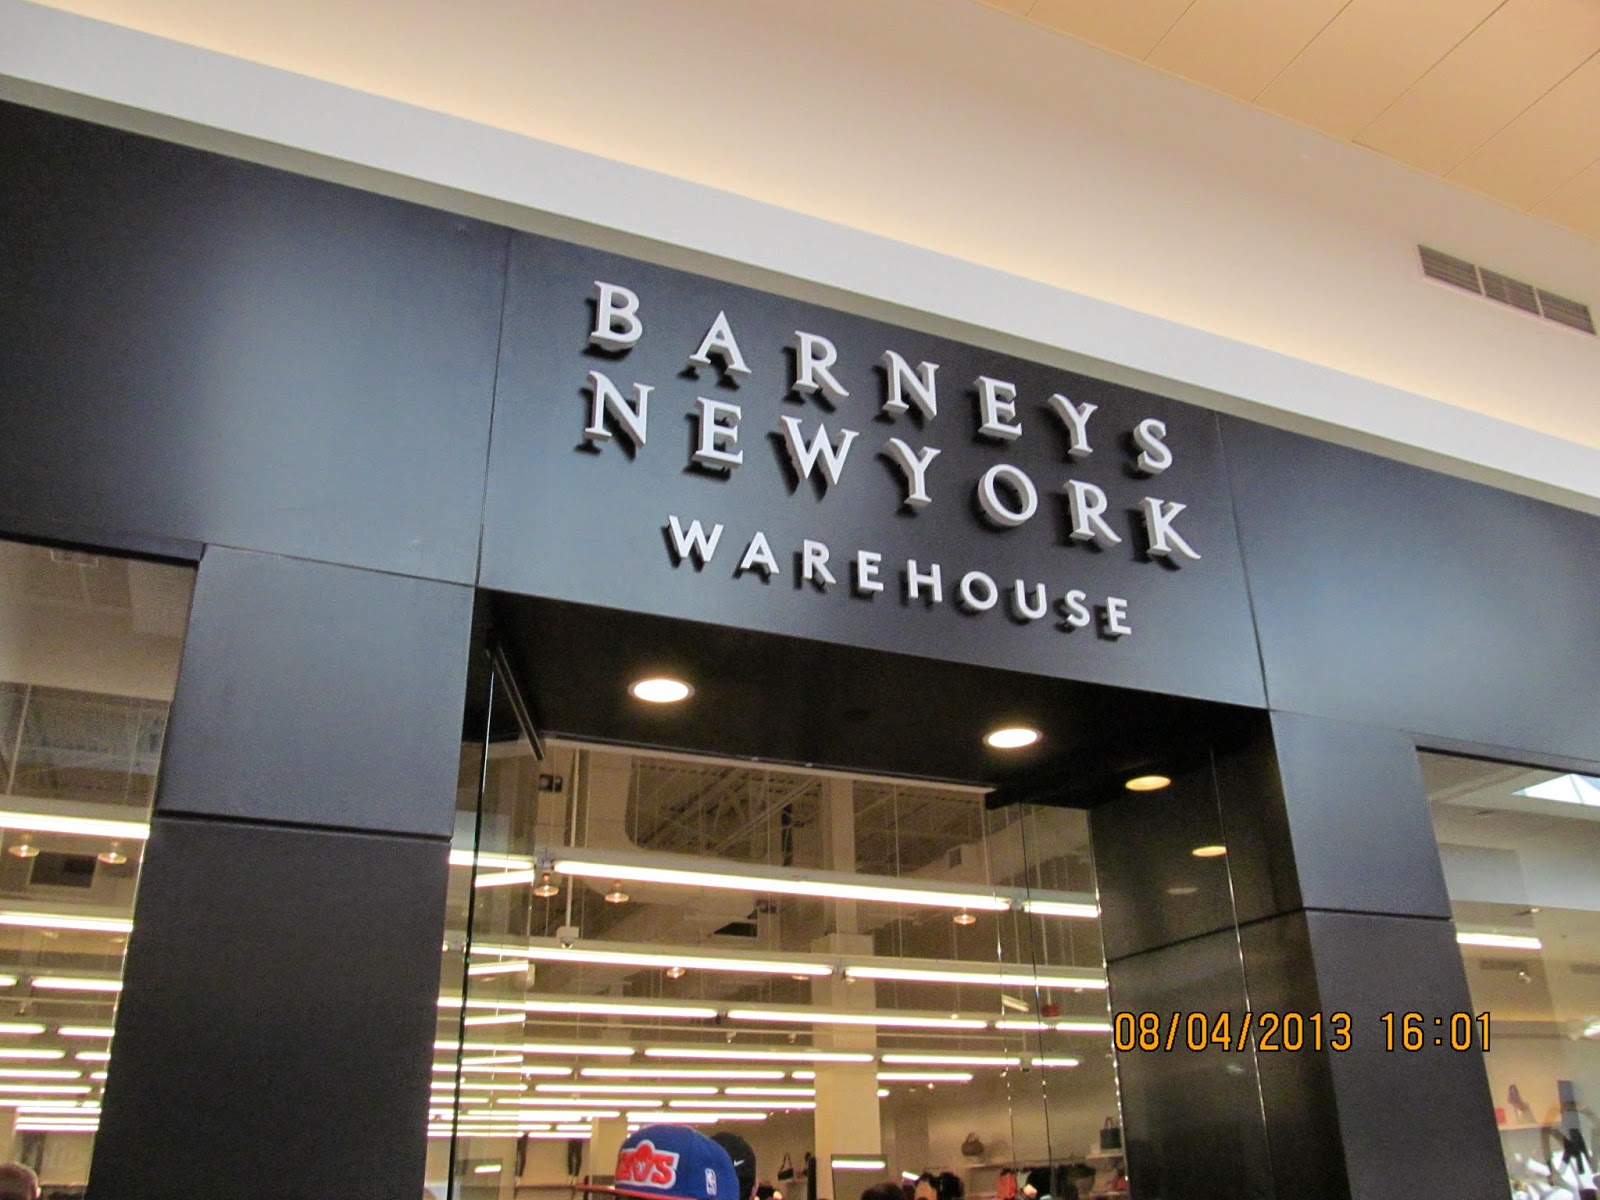 Trip to the Mall: Fashion Outlets of Chicago- (Rosemont, IL)